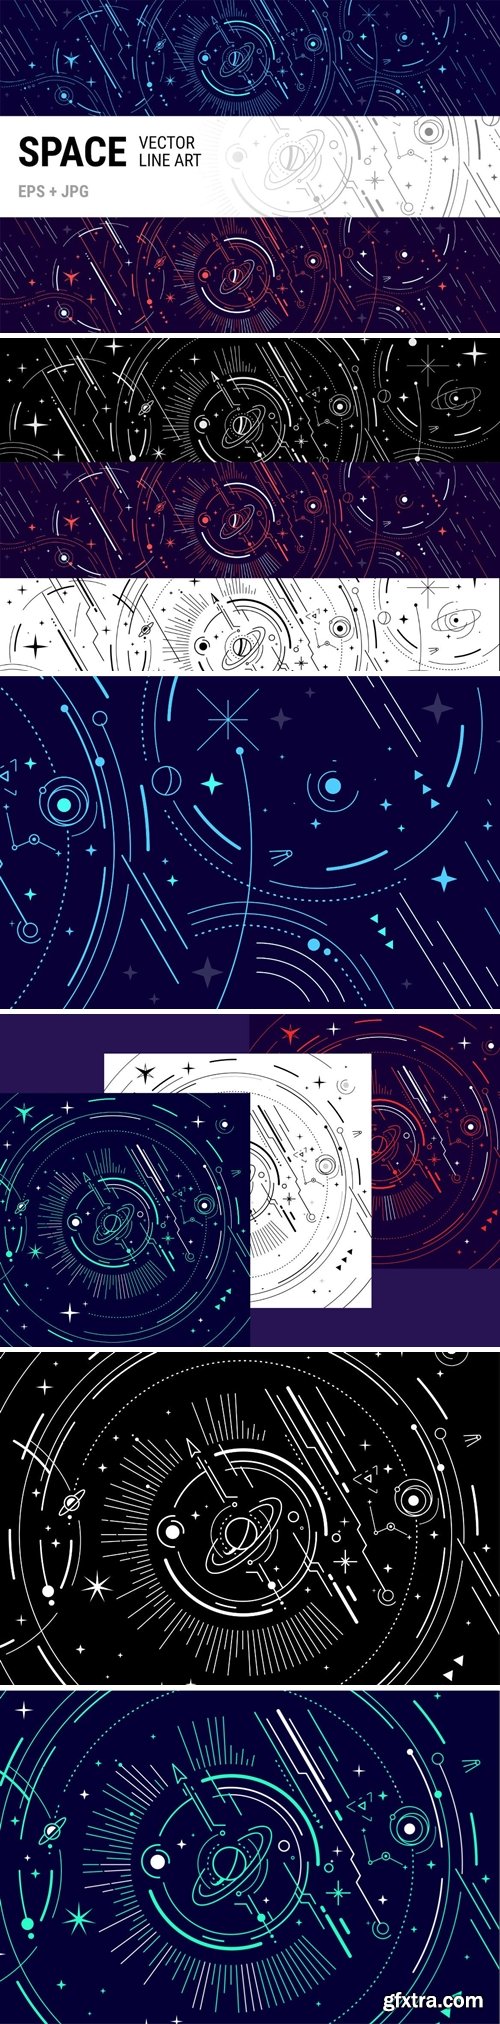 Abstract Space | Line Art Set